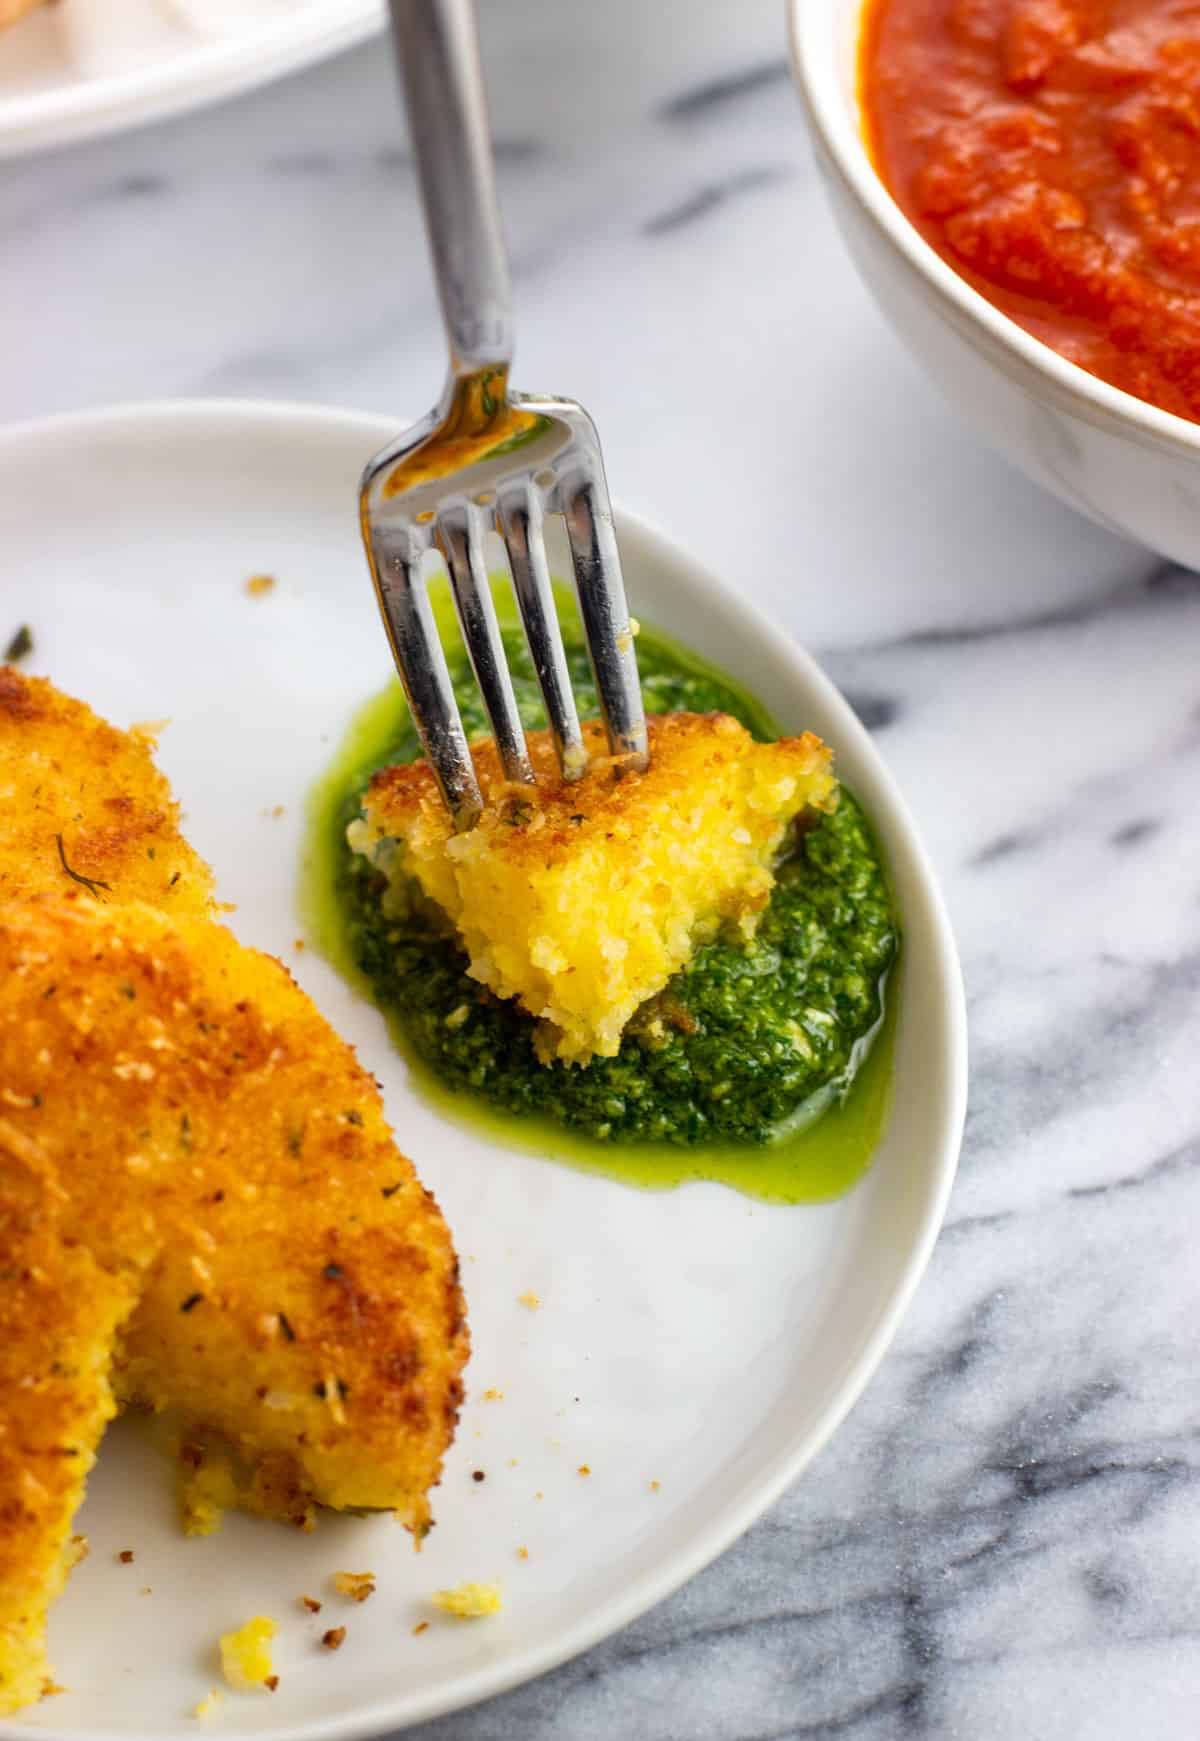 A forkful of polenta being dipped into basil pesto.